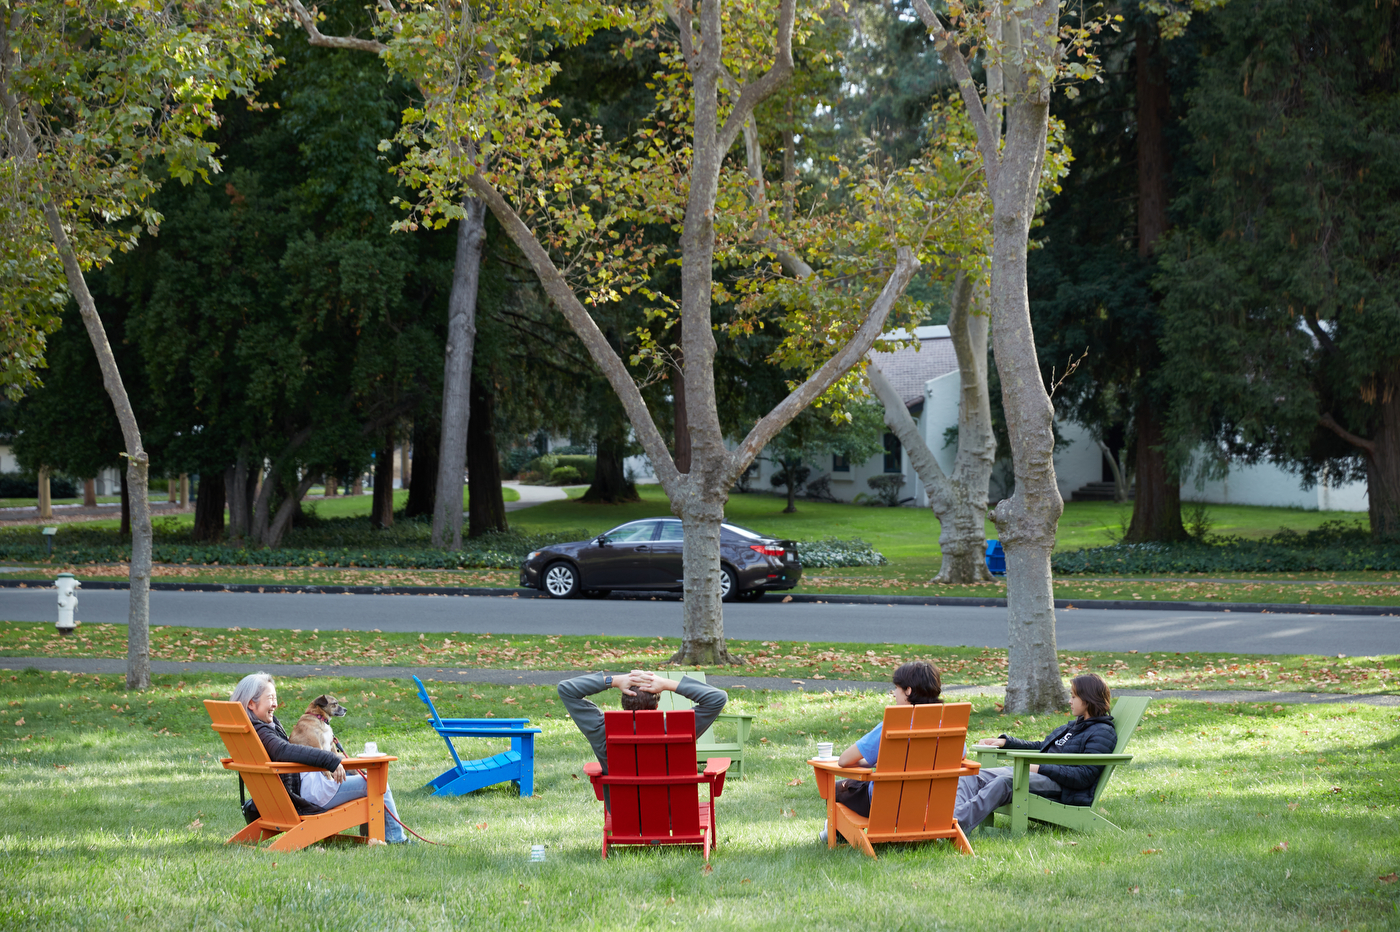 Students and families sitting in rainbow colored adirondack chairs.